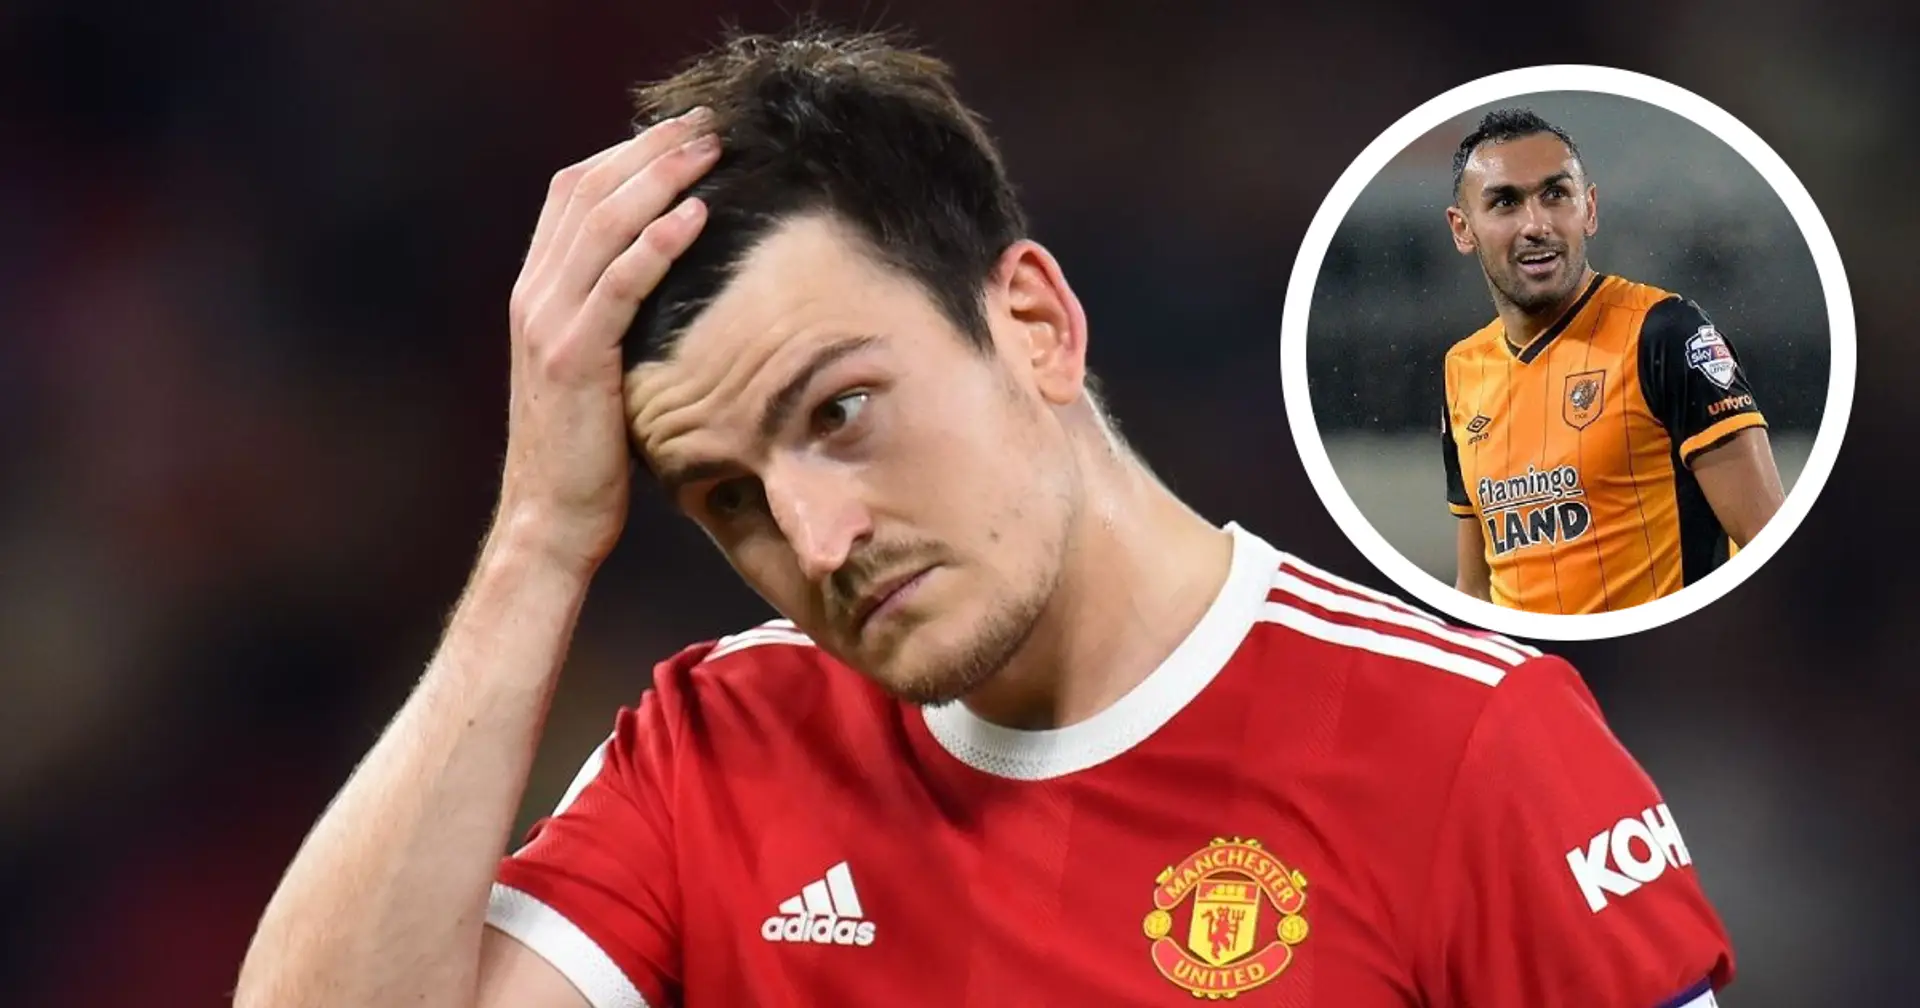 Maguire's ex-teammate Elmohamady: 'He doesn't have the level to be the Man United captain'